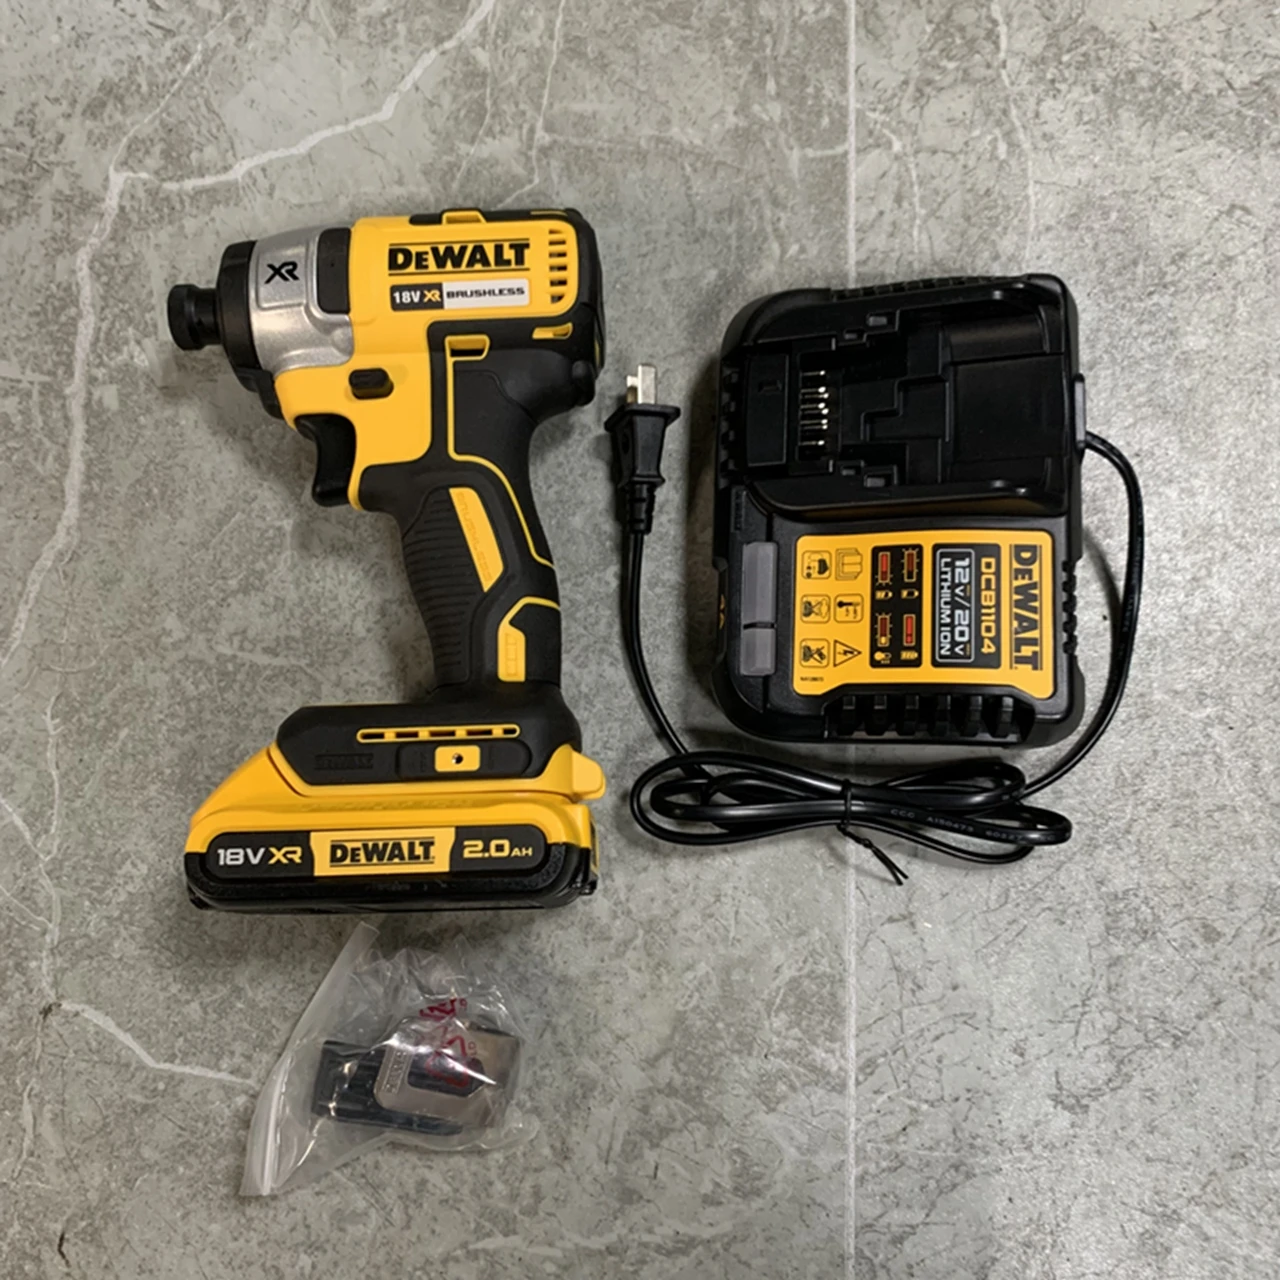 

New Dewalt DCF887 1/4" impact driver 20v Includes 2.0AH battery And charger New Tools